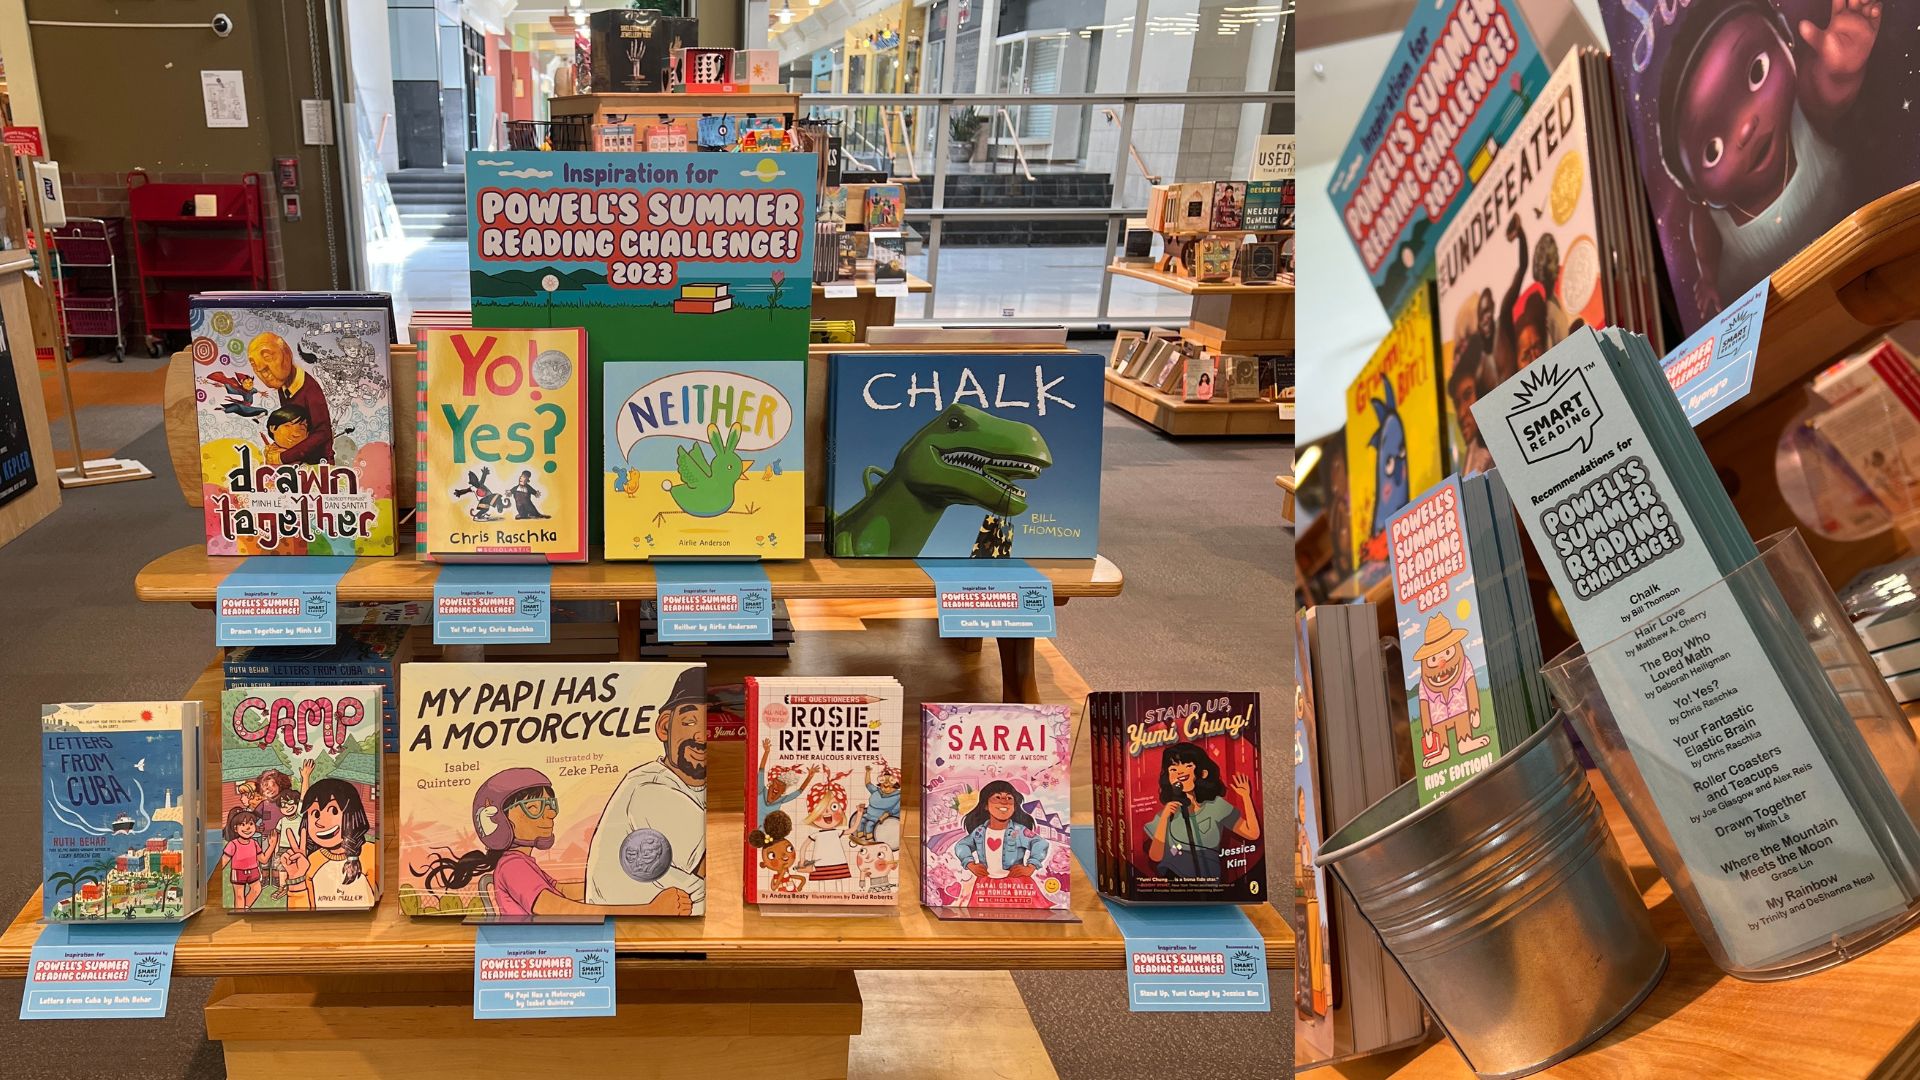 Books recommended by SMART on display at the Powell's Books in Beaverton.